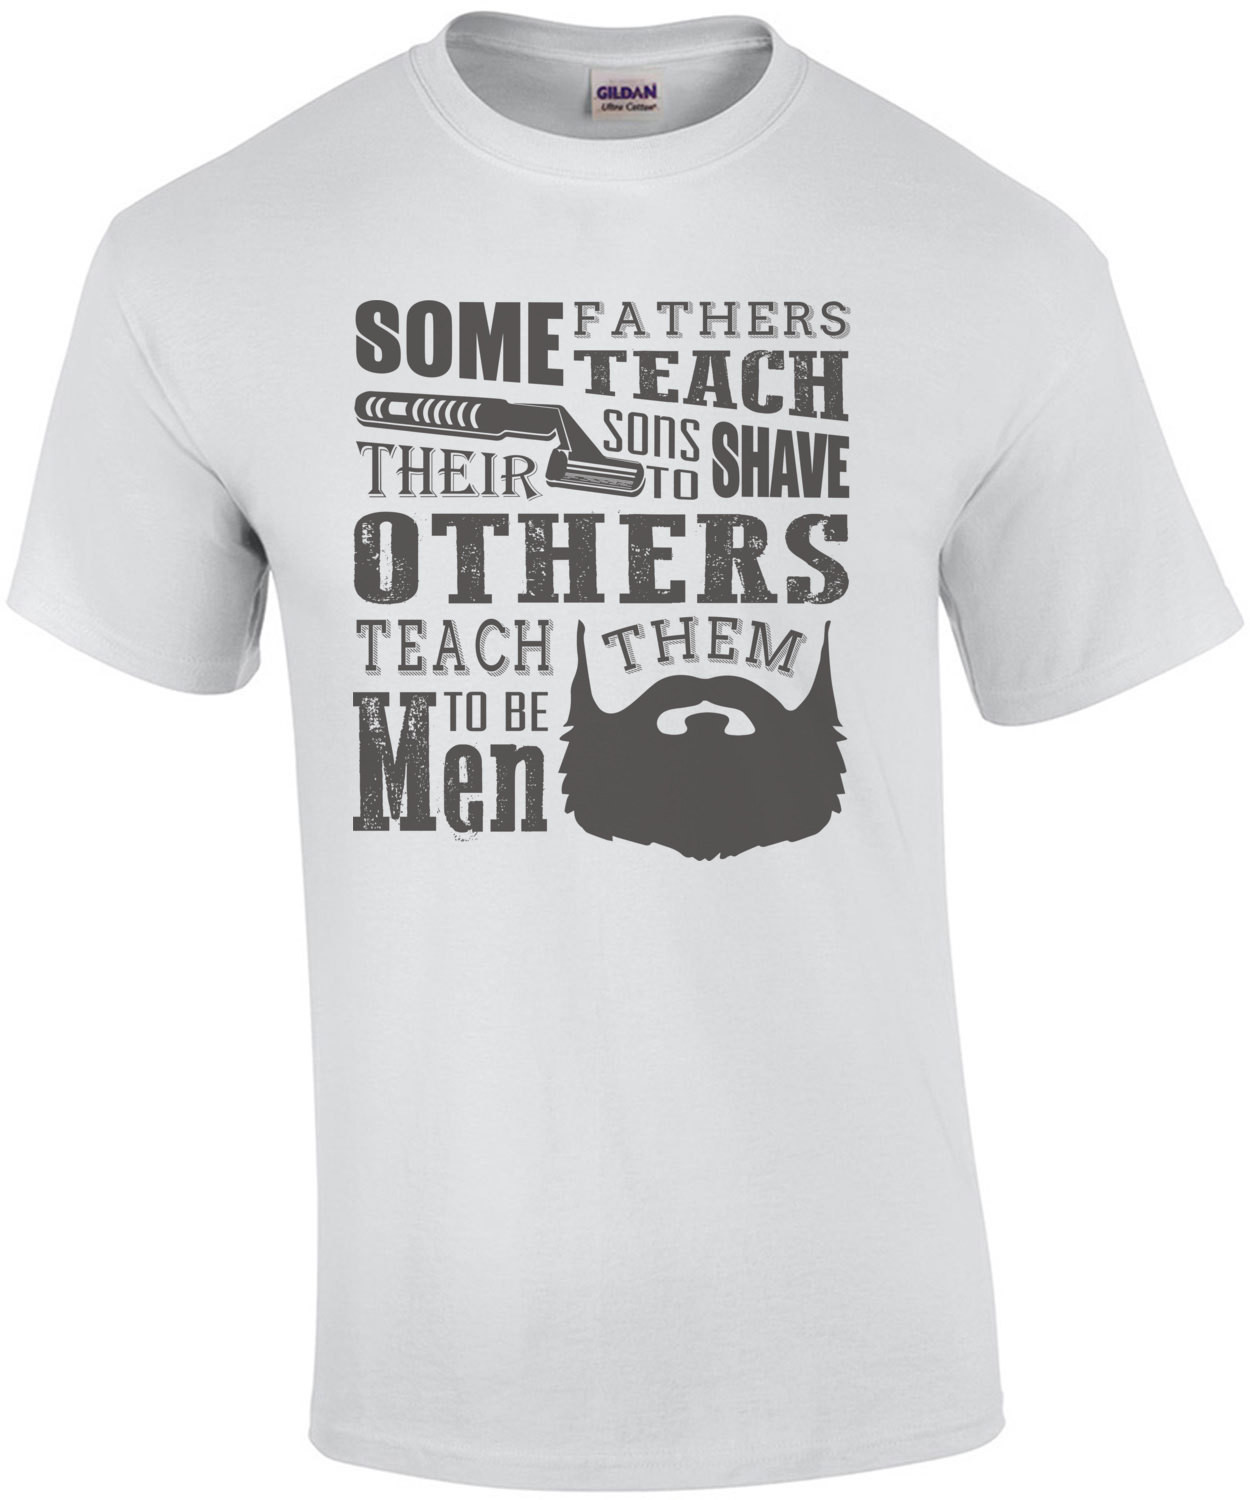 Some Fathers Teach Their Sons To Shave Others Teach Them To Be Men Beard T-Shirt